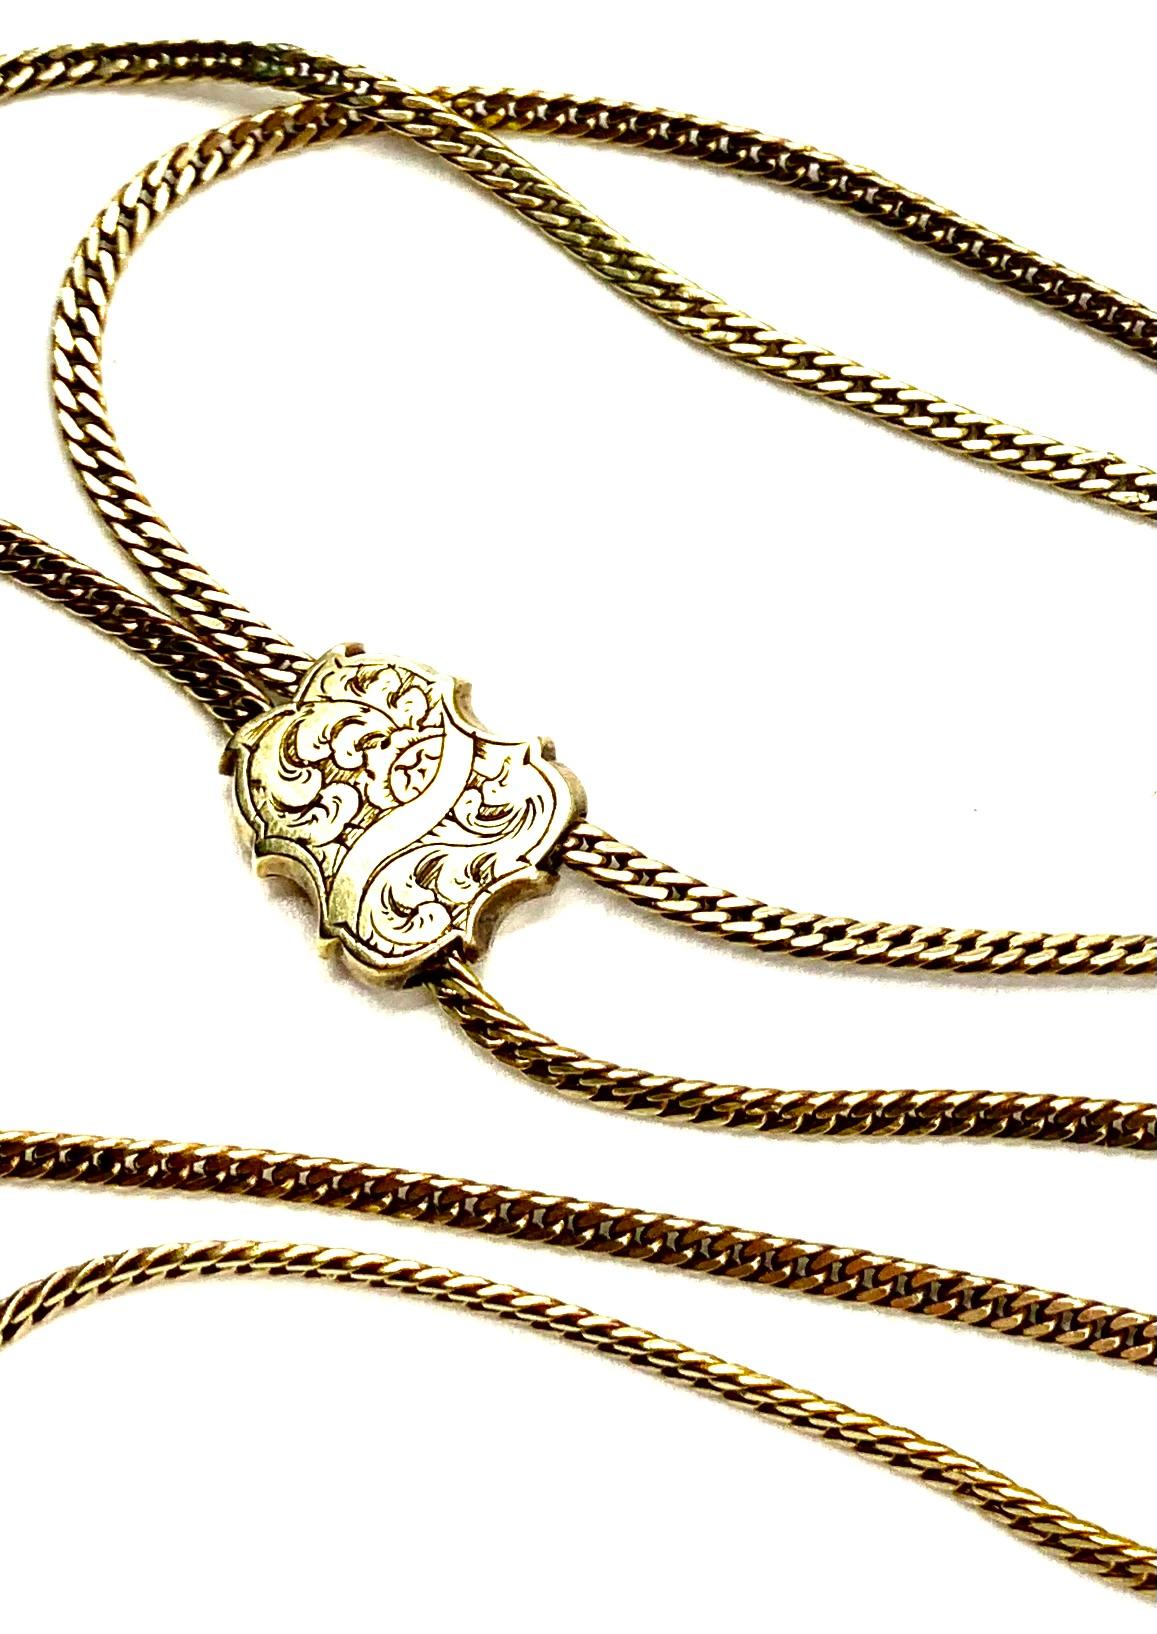 Exceptionally Long Antique 18K Gold Mano Sautoir Slide Chain Necklace Circa 1840 For Sale 9